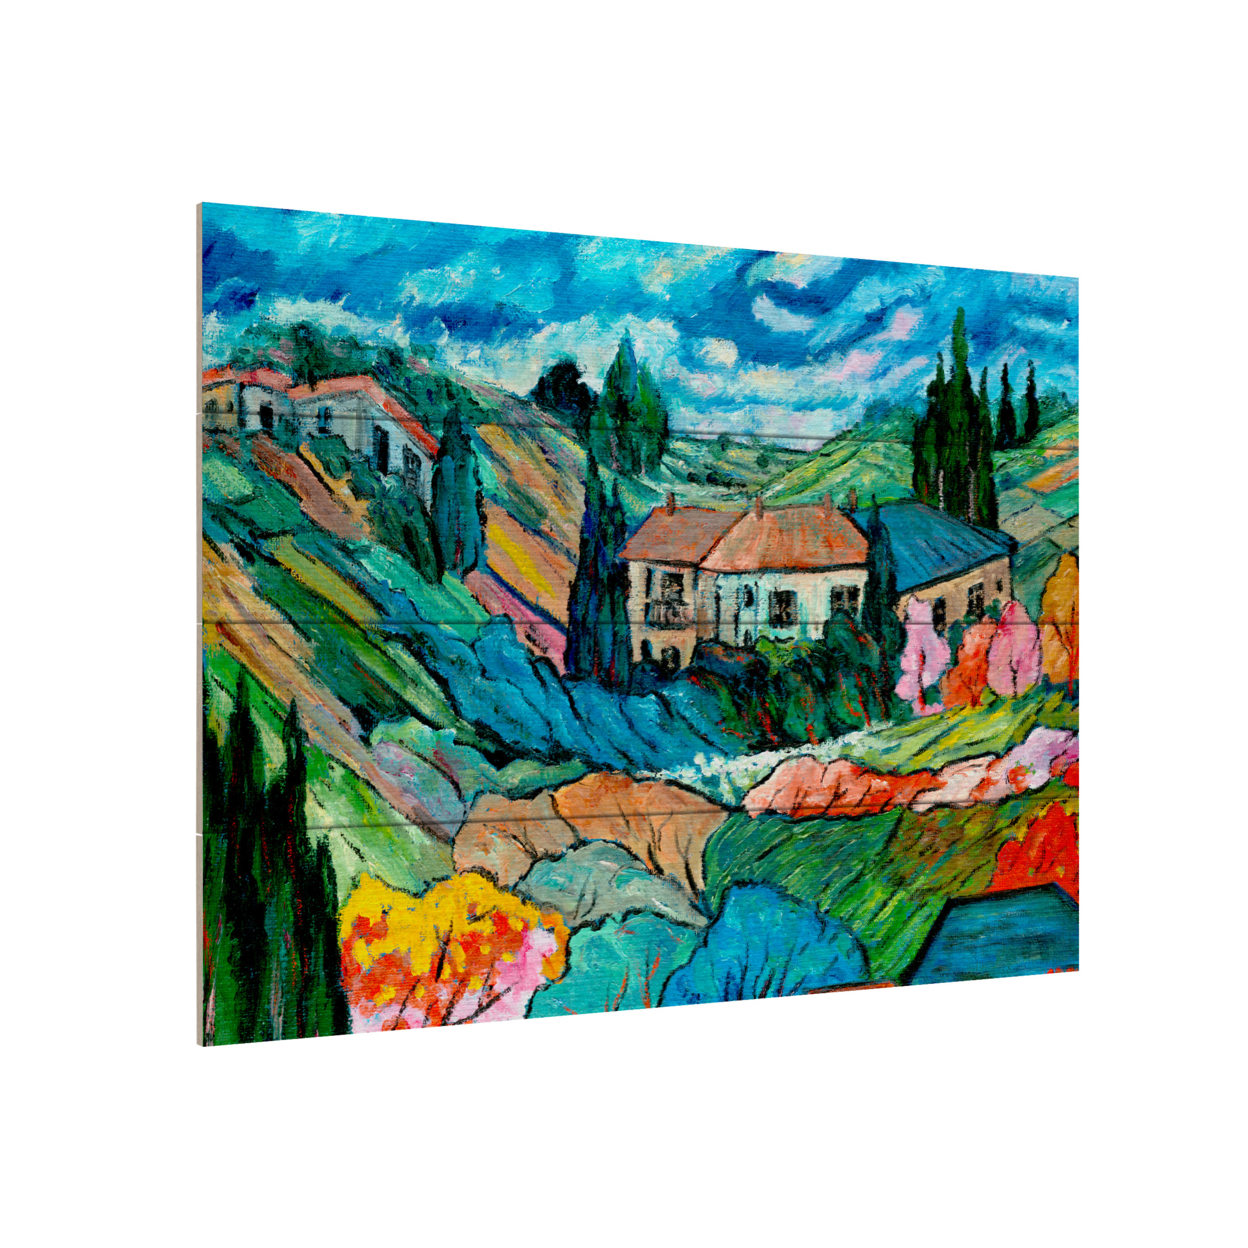 Wall Art 12 X 16 Inches Titled Valley House Ready To Hang Printed On Wooden Planks